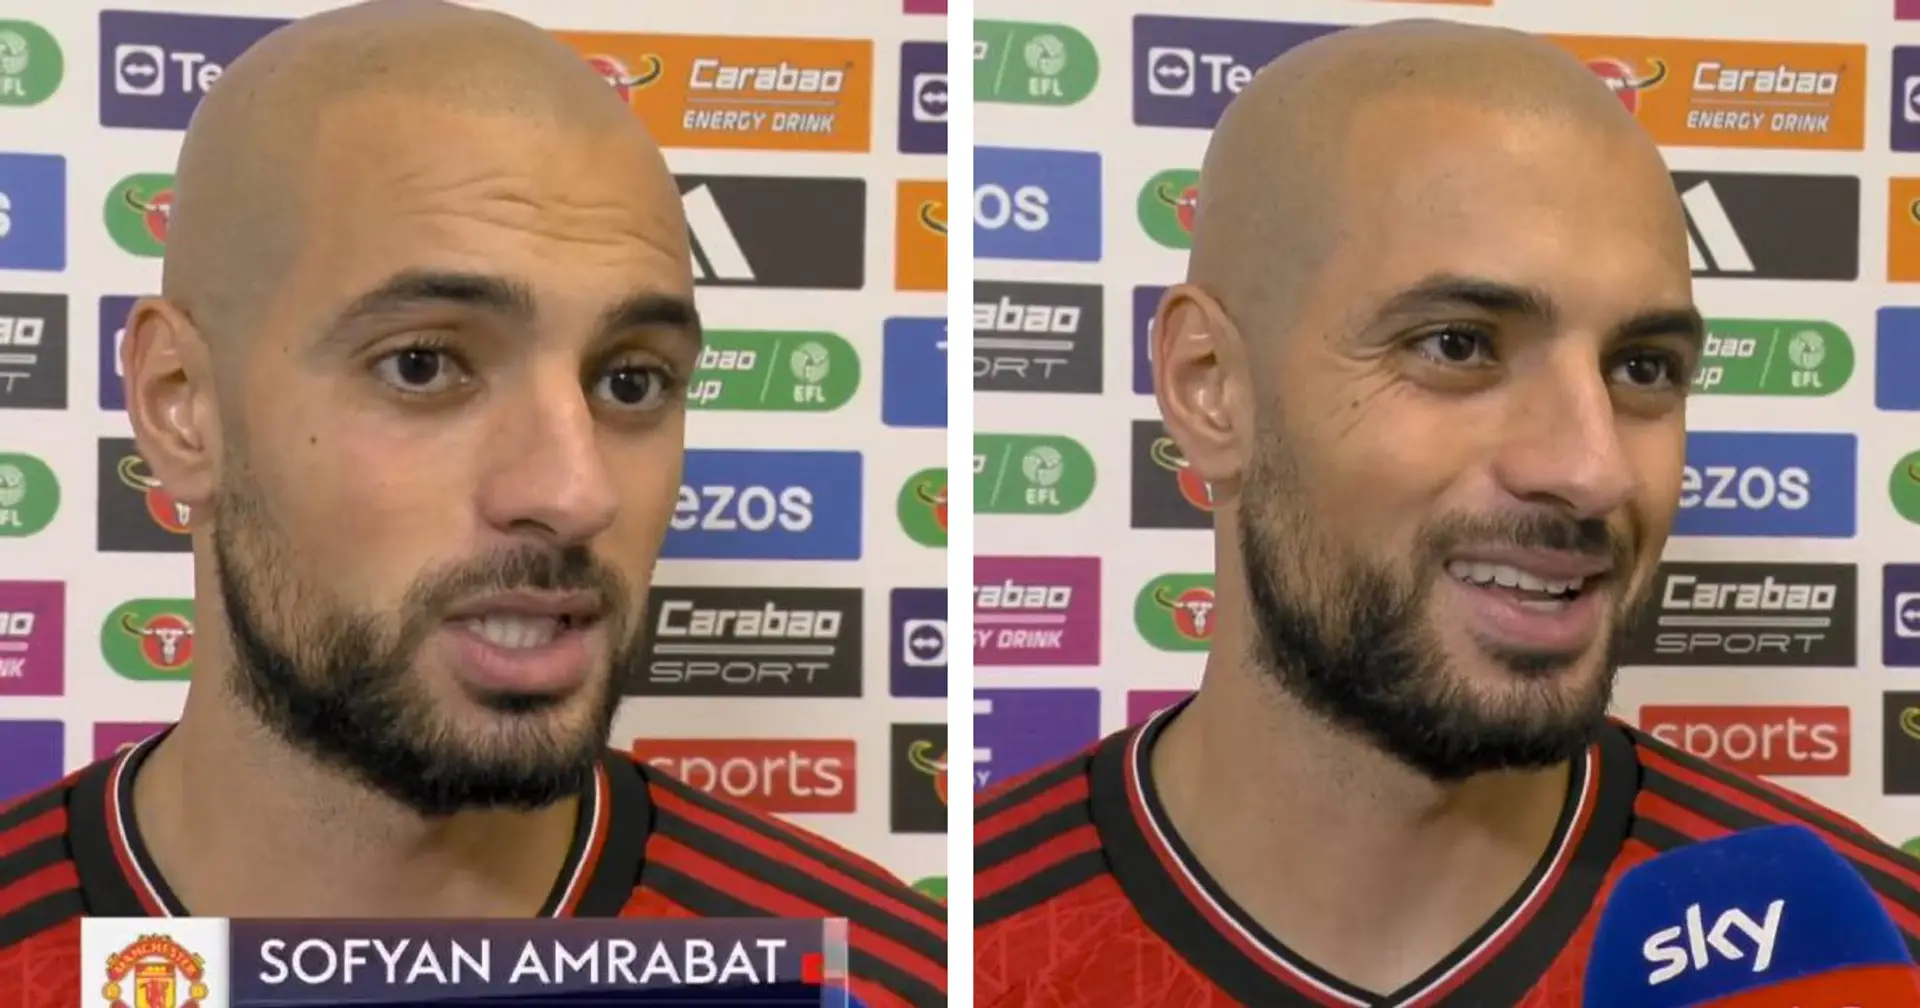 Sofyan Amrabat: 'I'm not at my best at the moment' 